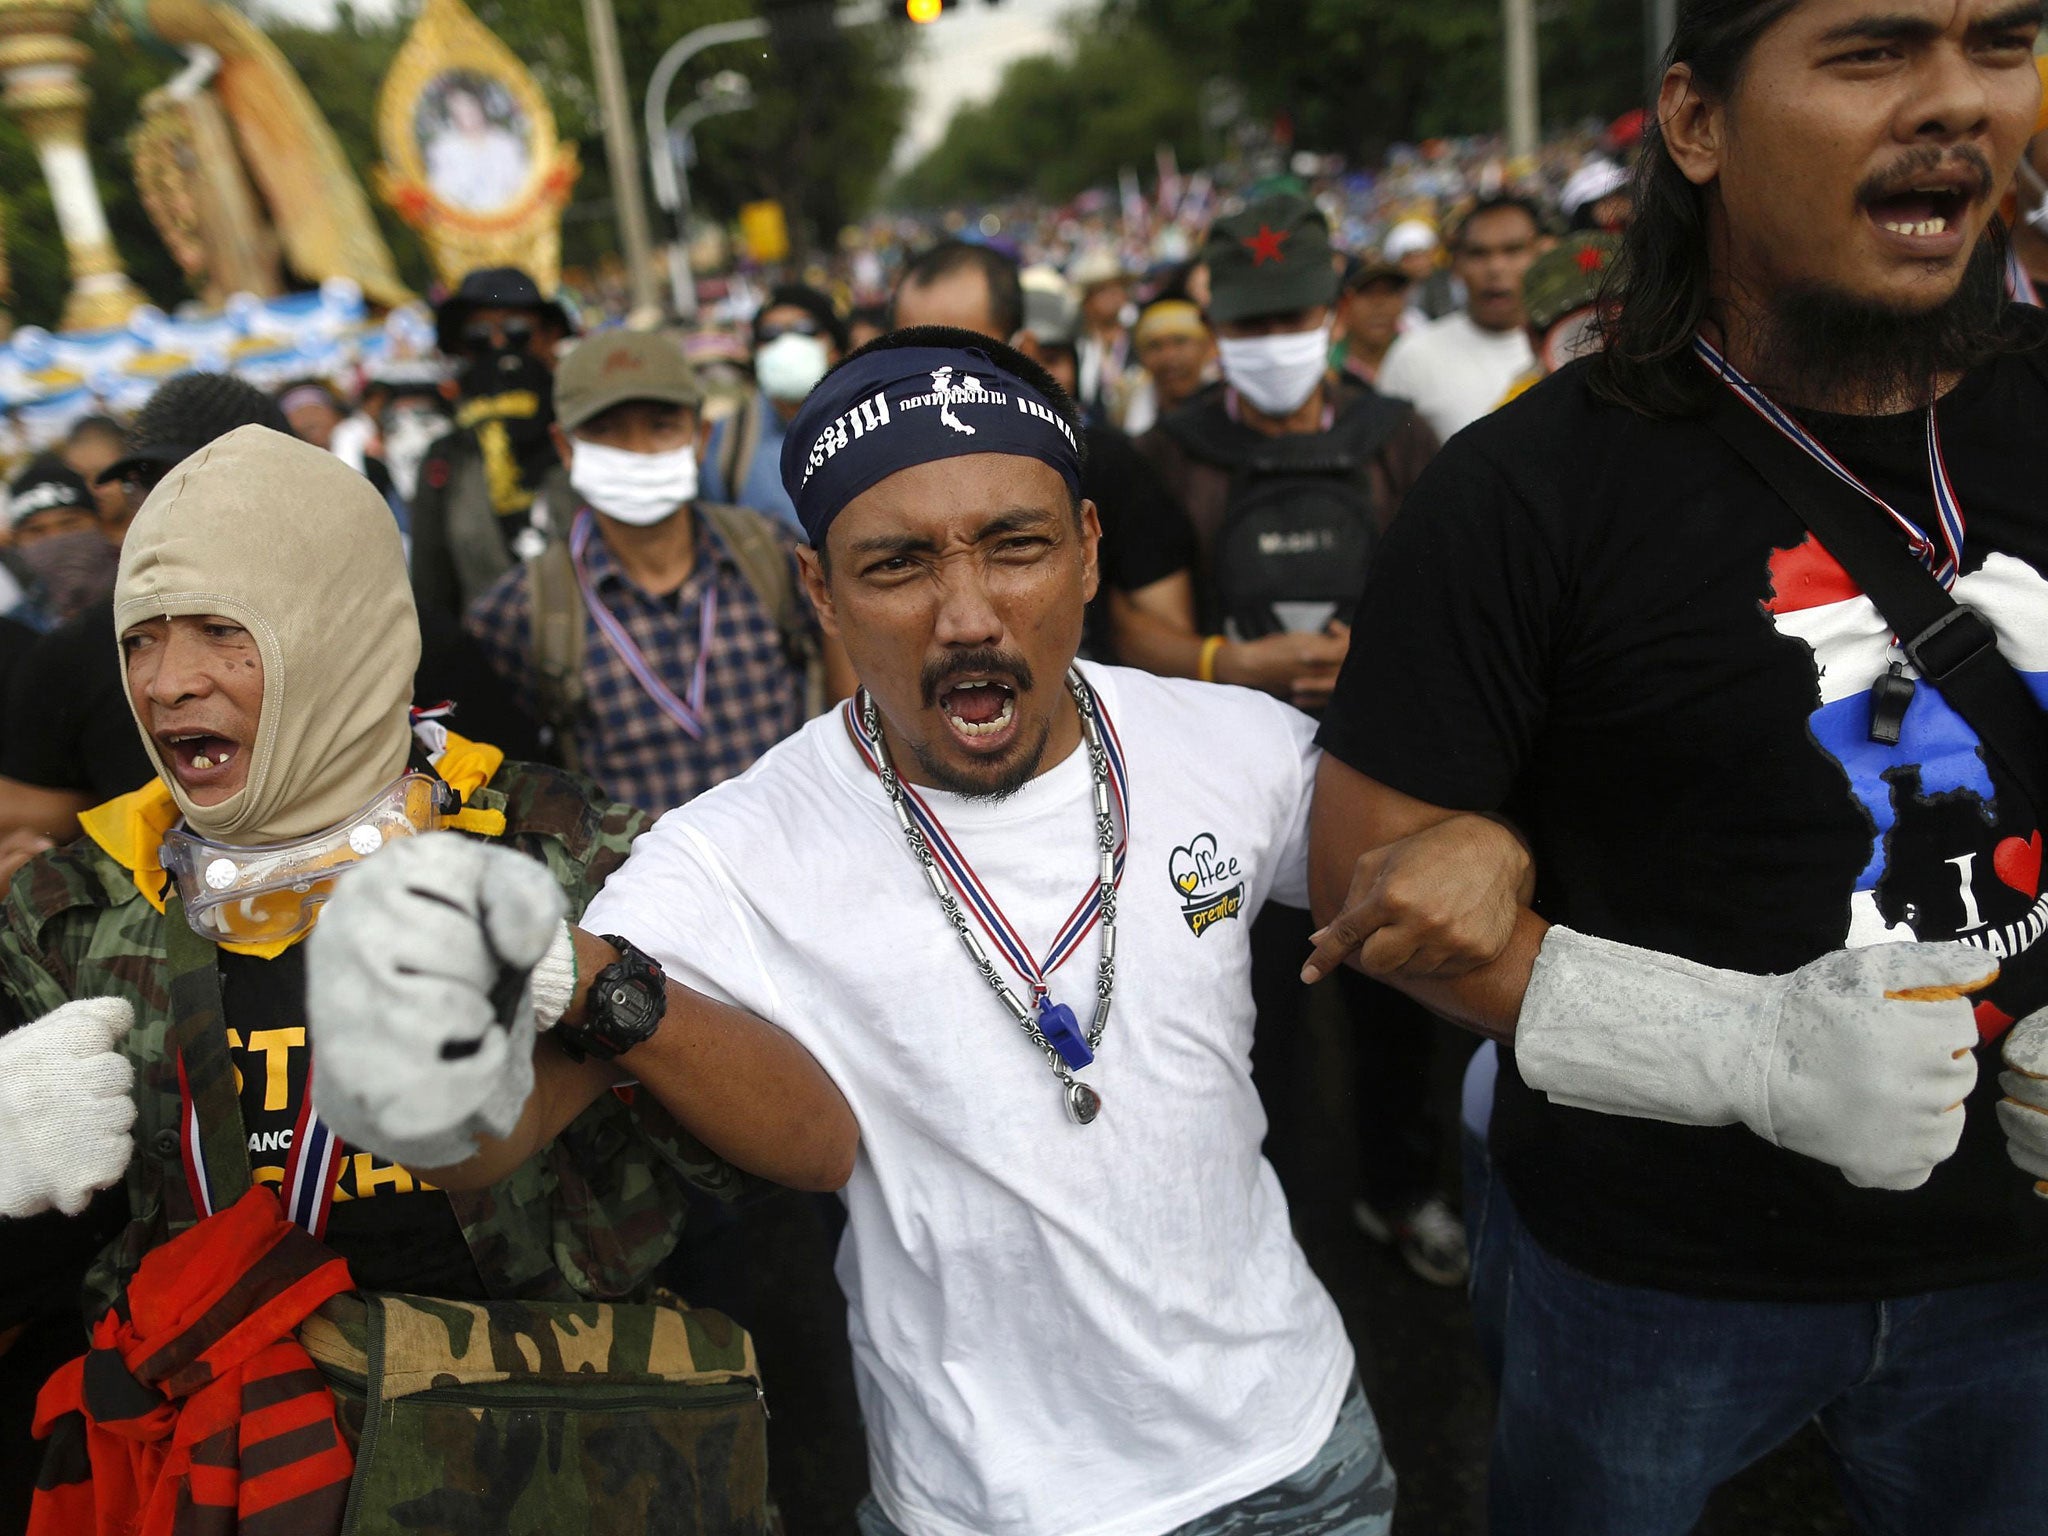 Protesters face a police barricade near the parliament buildings in Bangkok